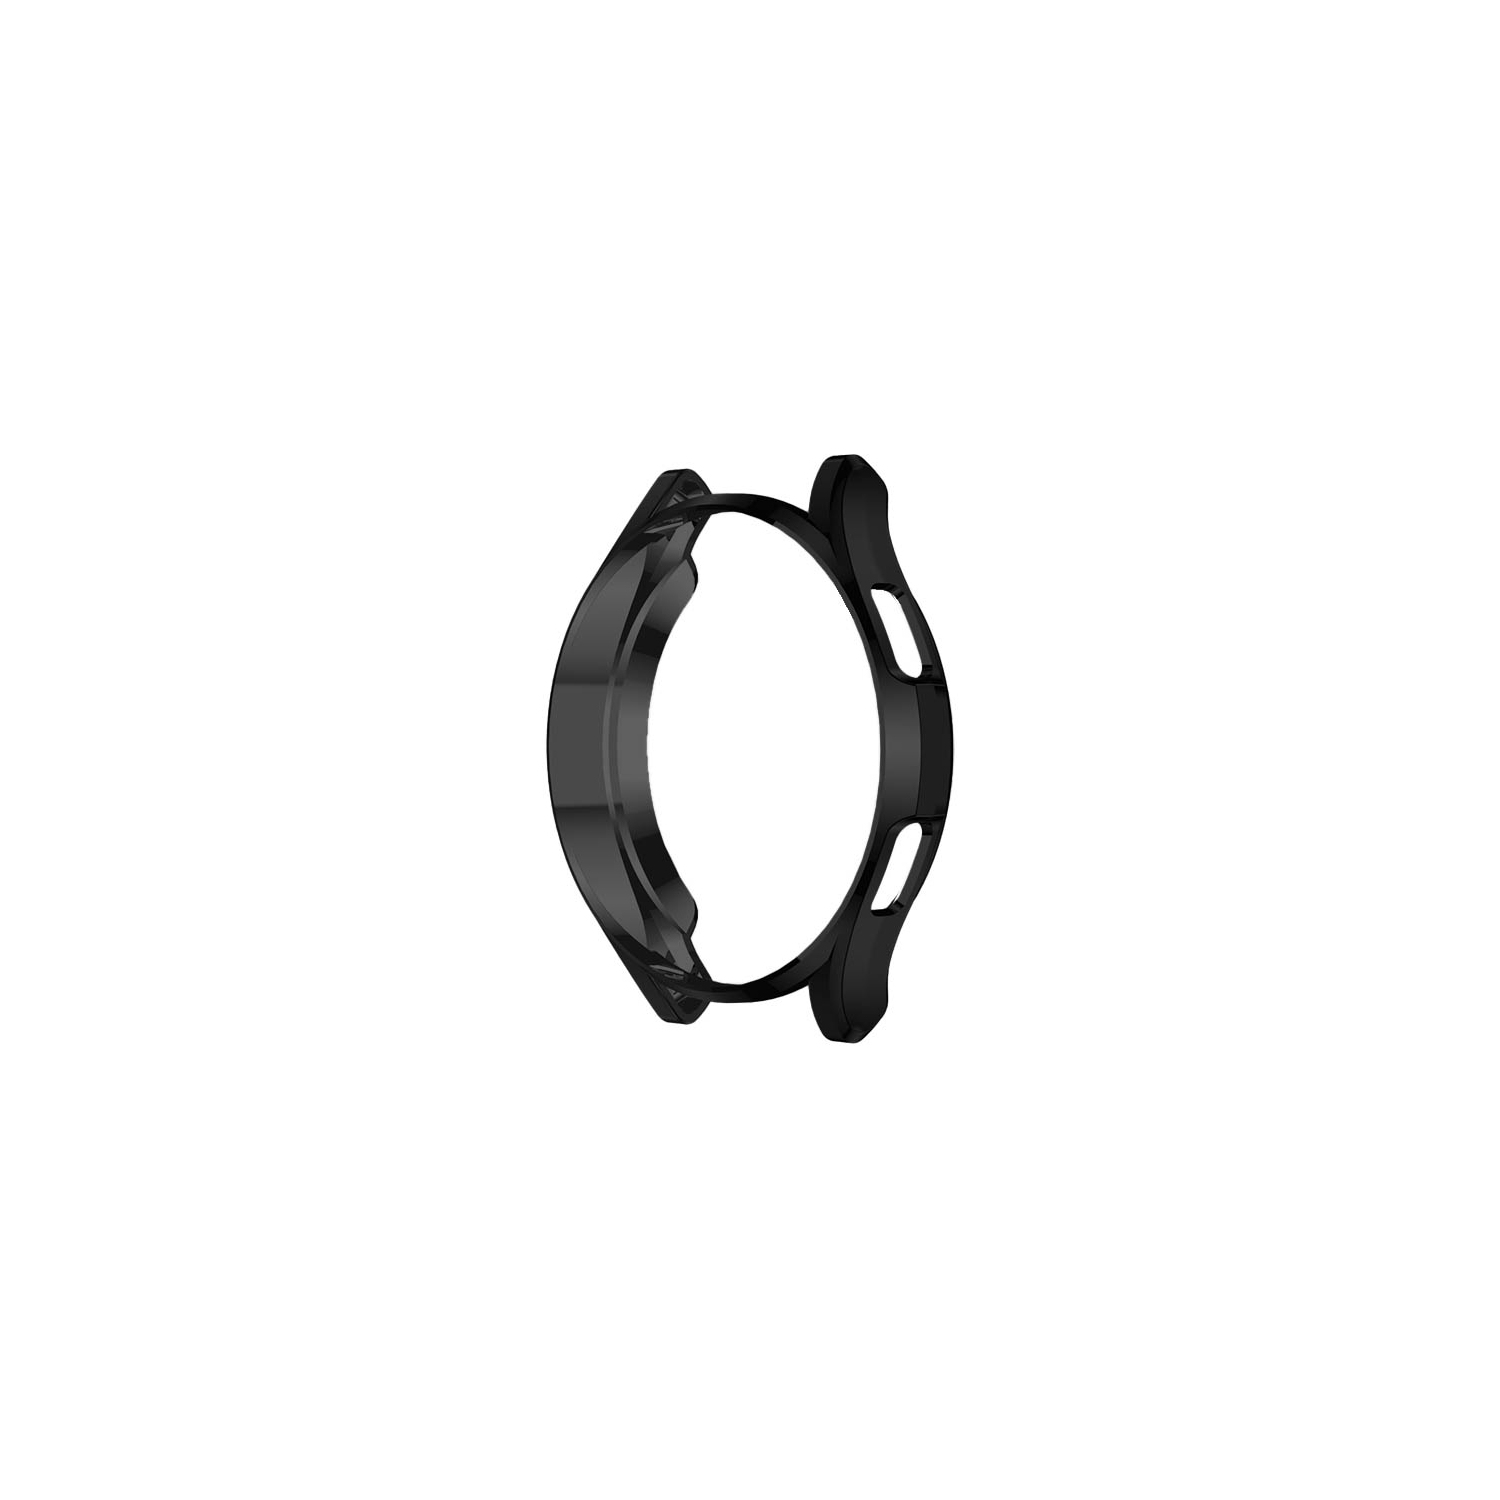 StrapsCo Metallic TPU Rubber Protective Case for Samsung Galaxy Watch 4 - For 40mm Galaxy Watch4 - Black